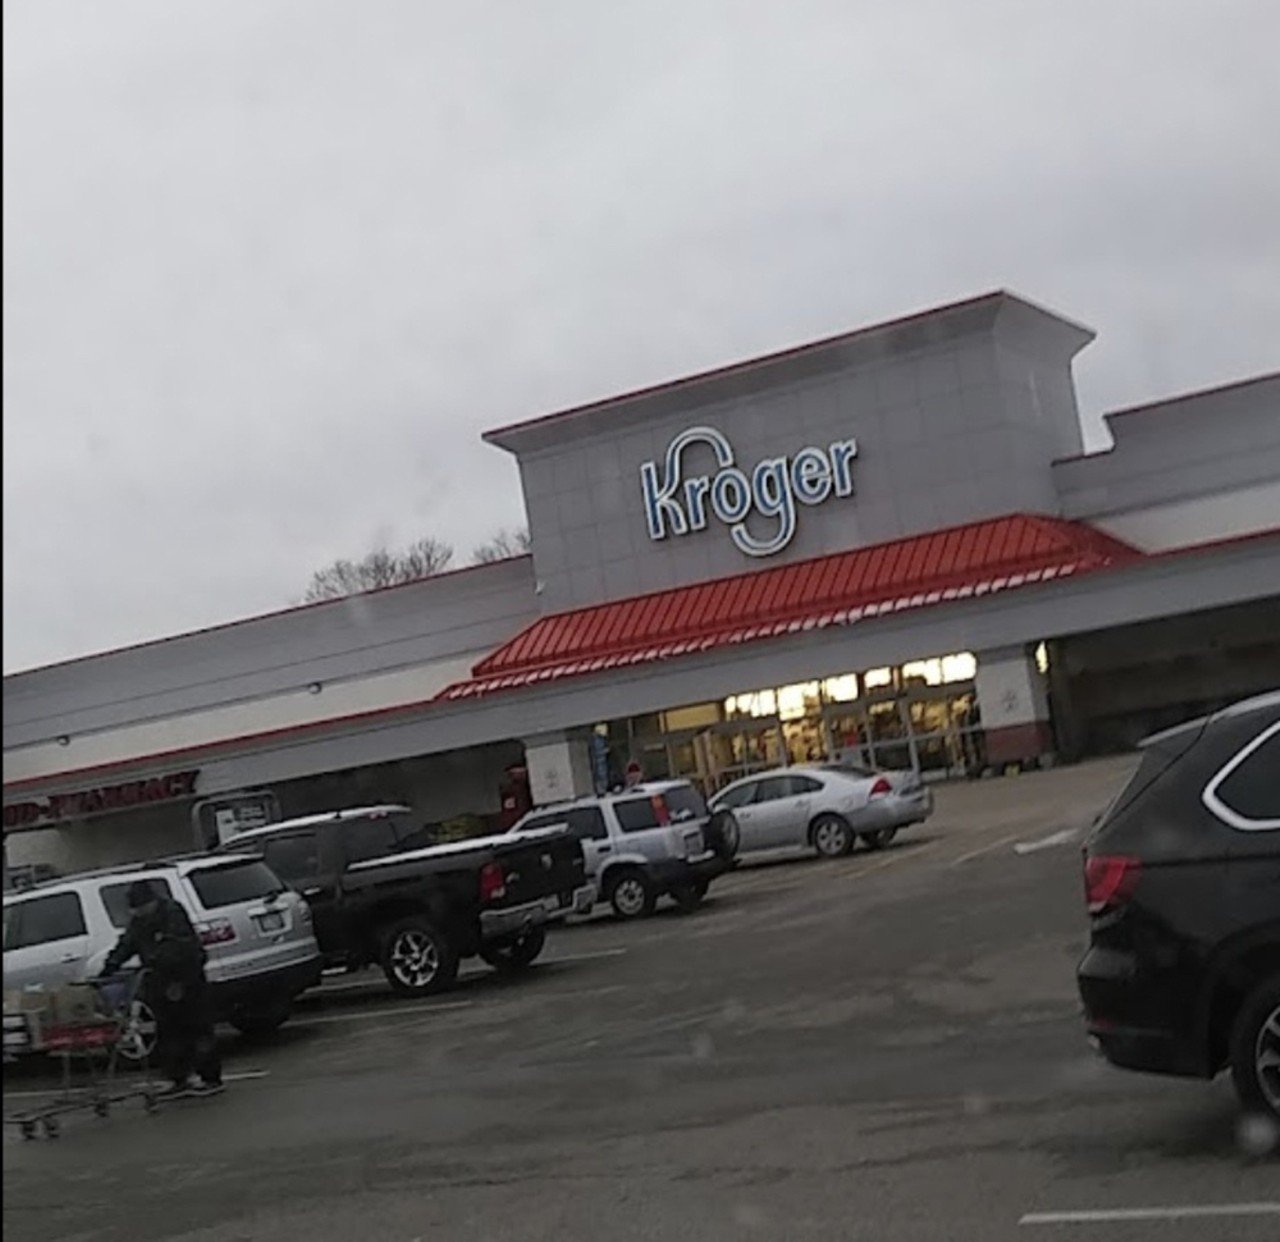 Goshen (6725 Dick Flynn Rd.)
“The old times [sic] Kroger in Milford/Goshen is a trip. It’s almost like they exist outside the Kroger ecosystem. It’s an IGA with a Kroger sign!” said Reddit user Bengalstomp.